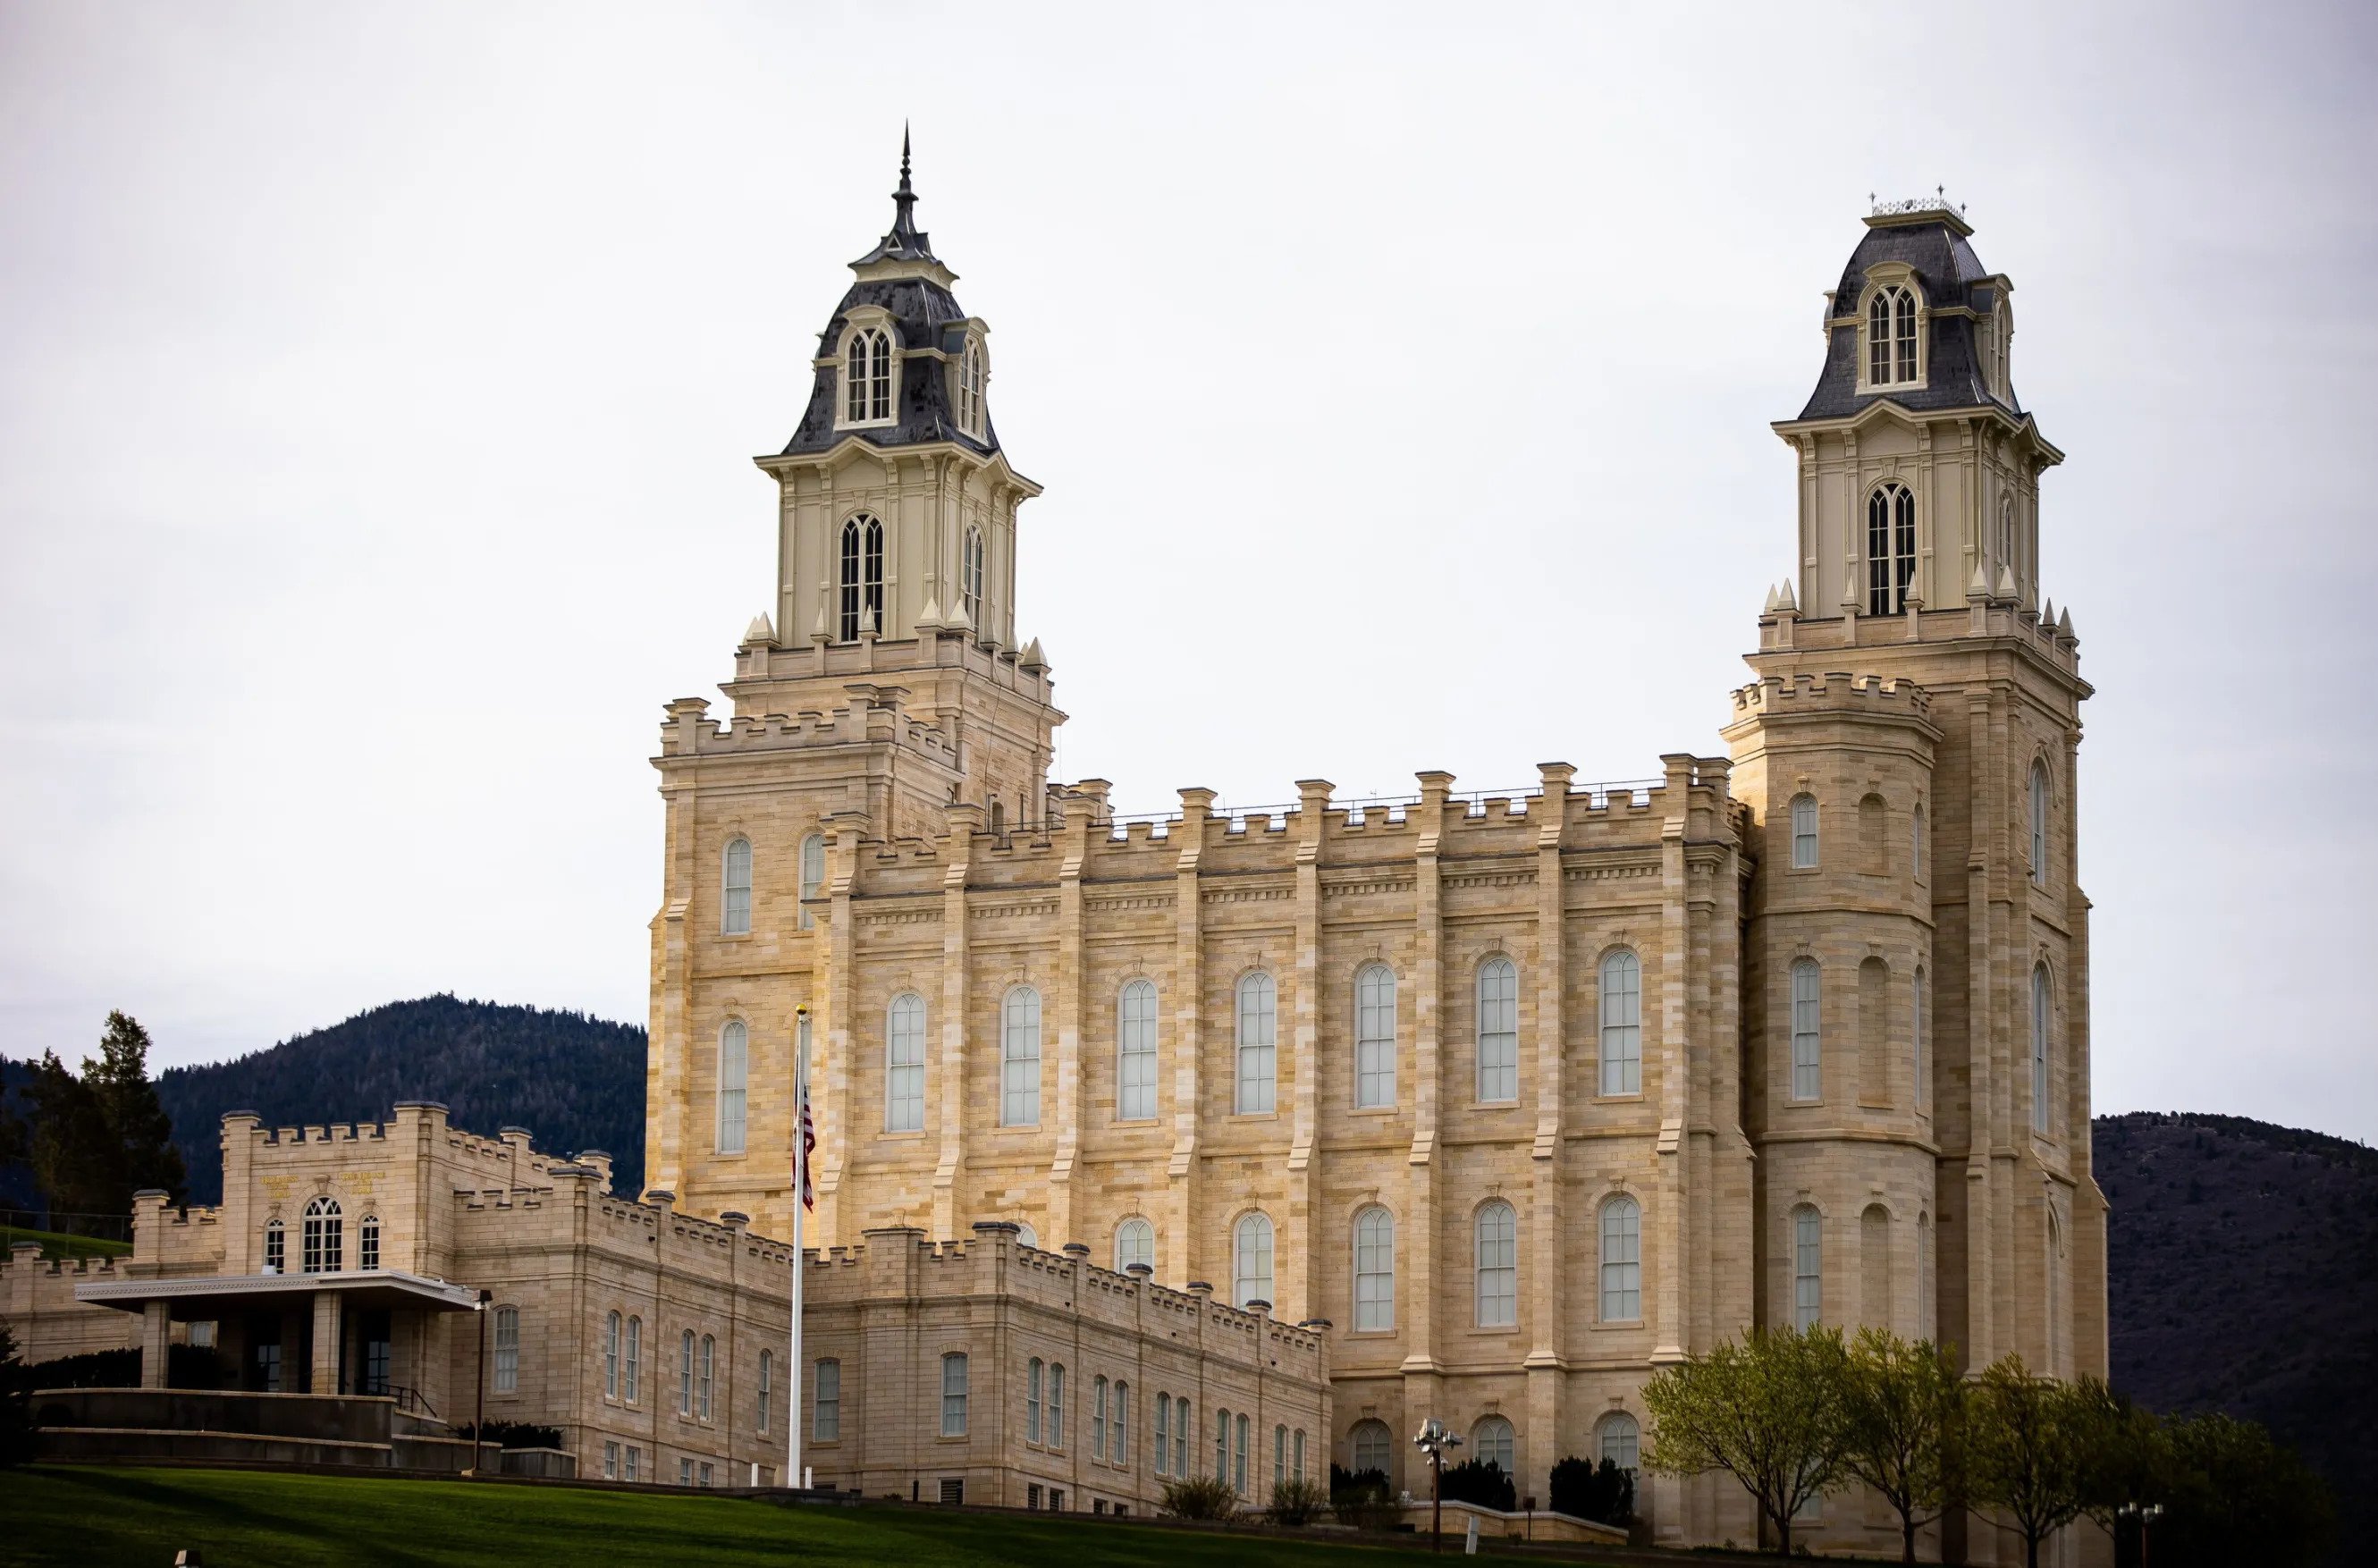 The Manti Utah Temple, a white, rectangular building with two domed towers on both short sides.